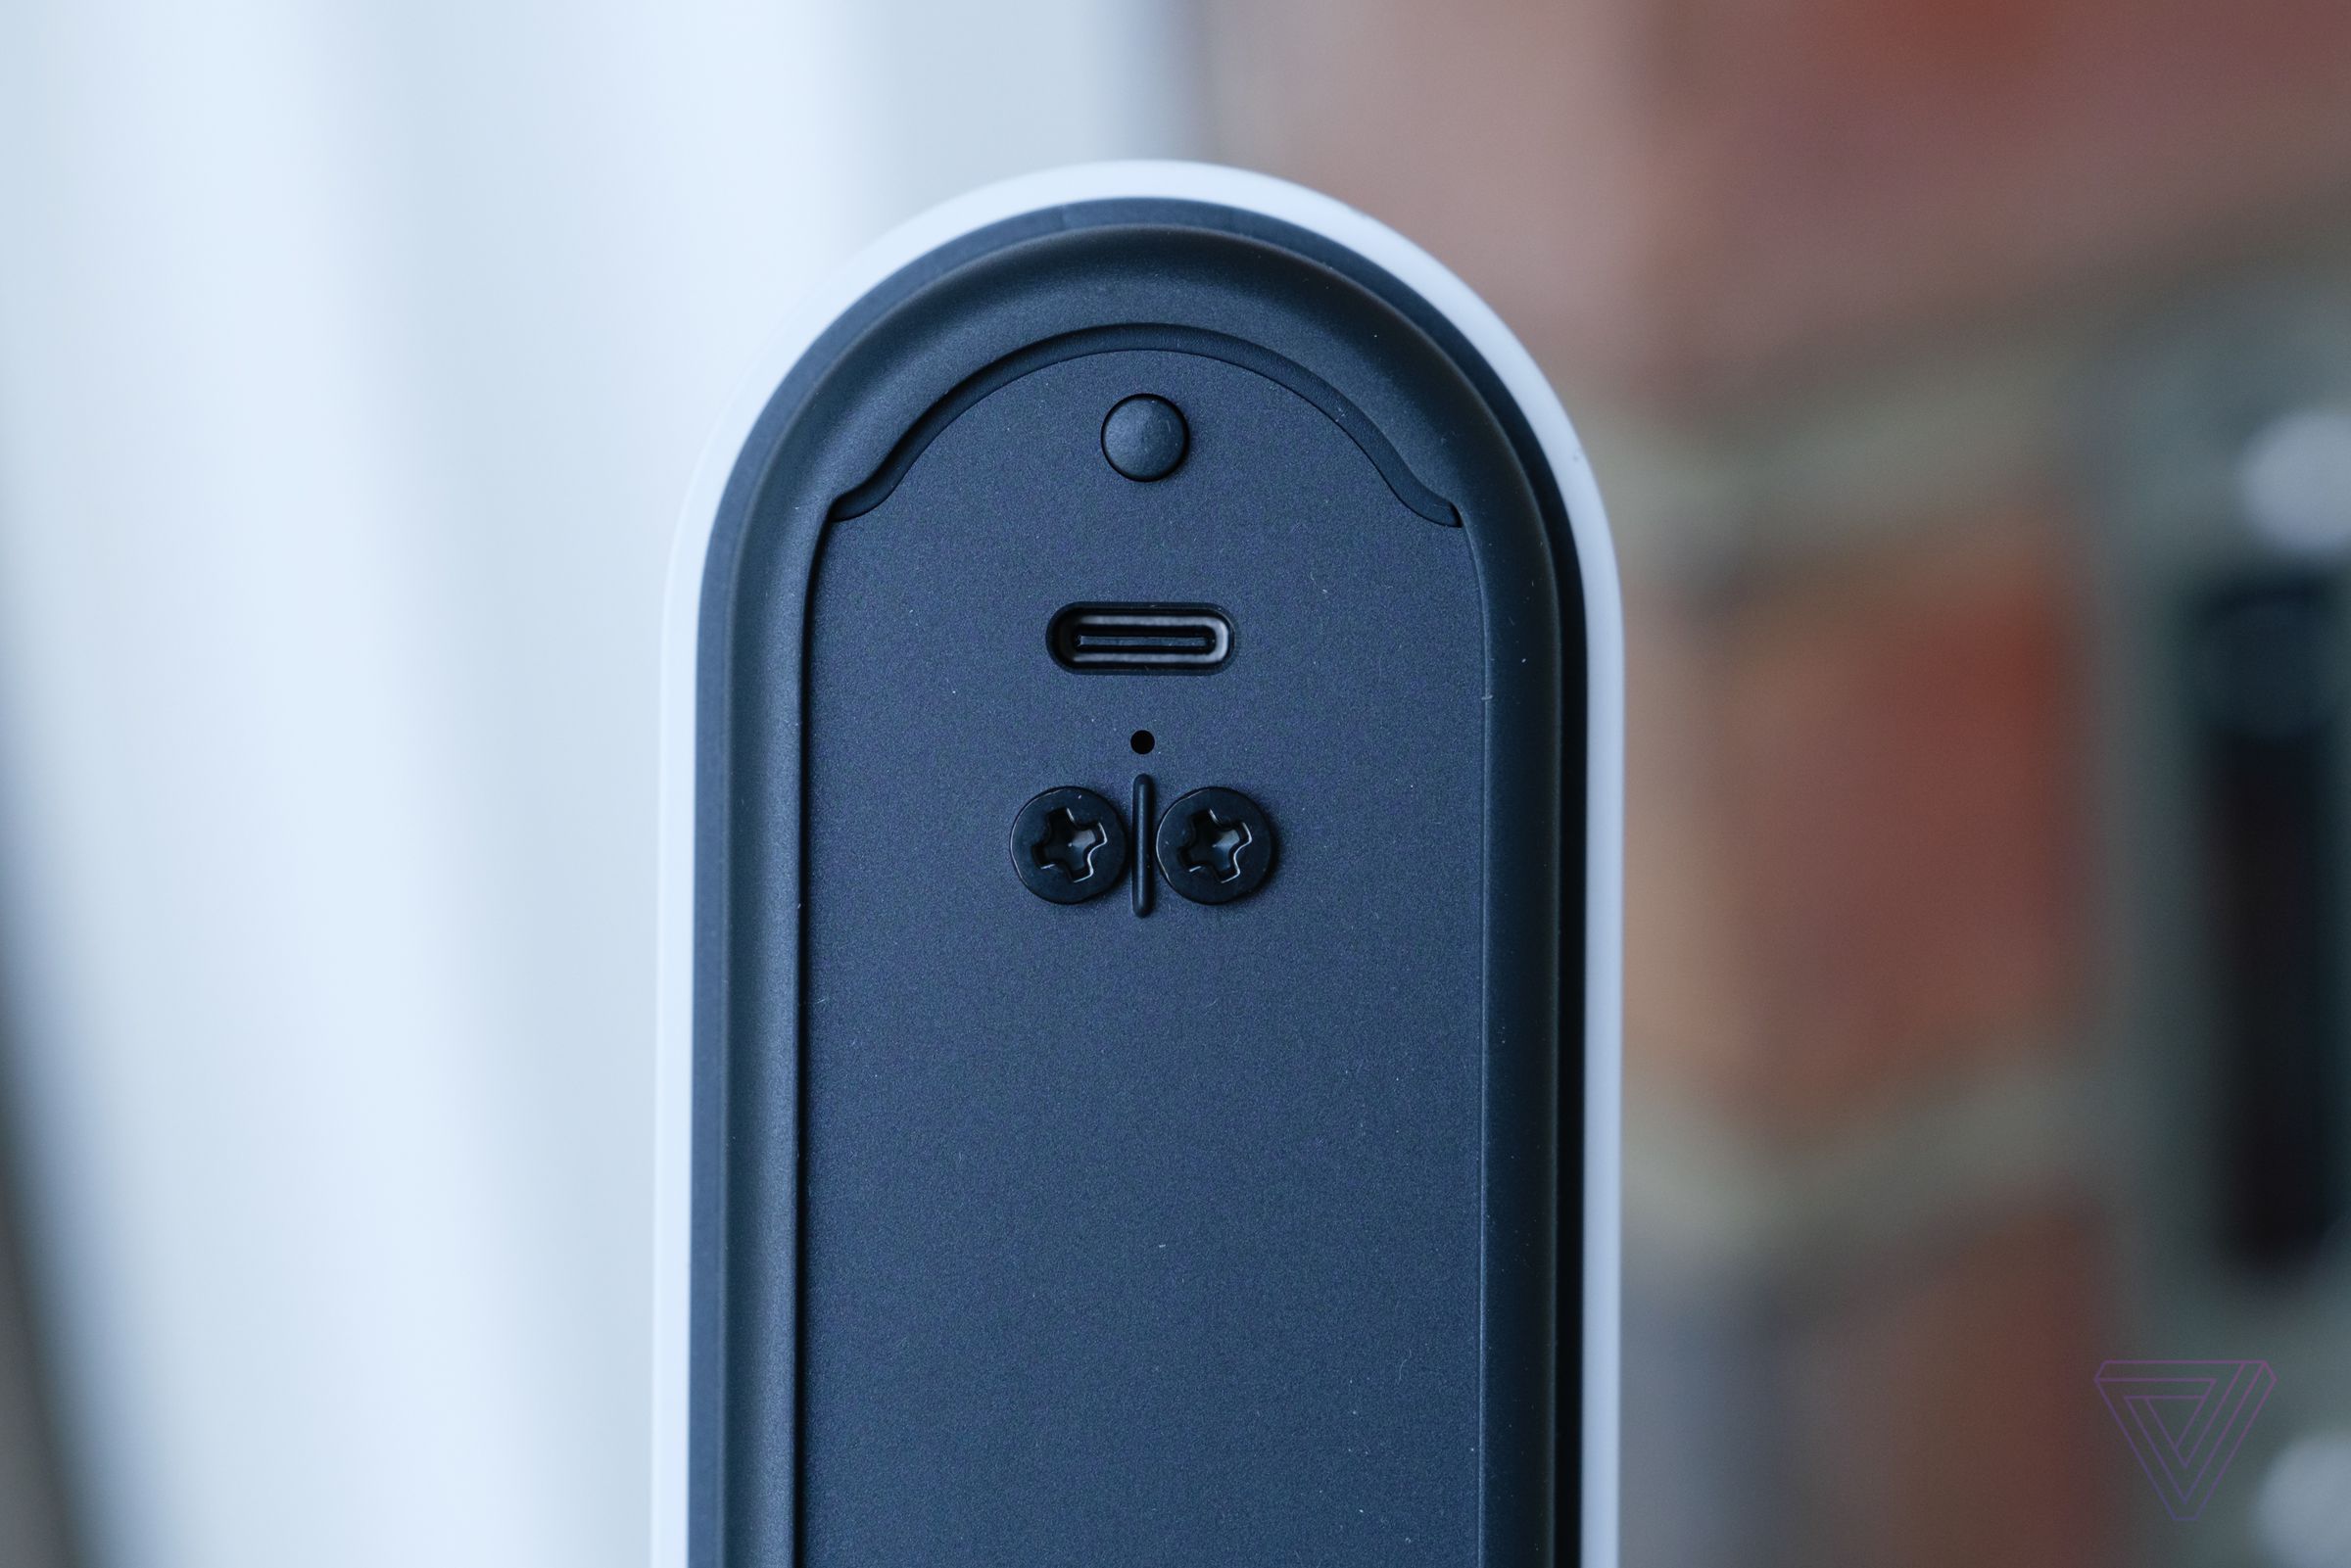 Charging the battery takes about 4.5 hours and requires removing the doorbell from its mount. It can also be connected to traditional doorbell wiring if available.